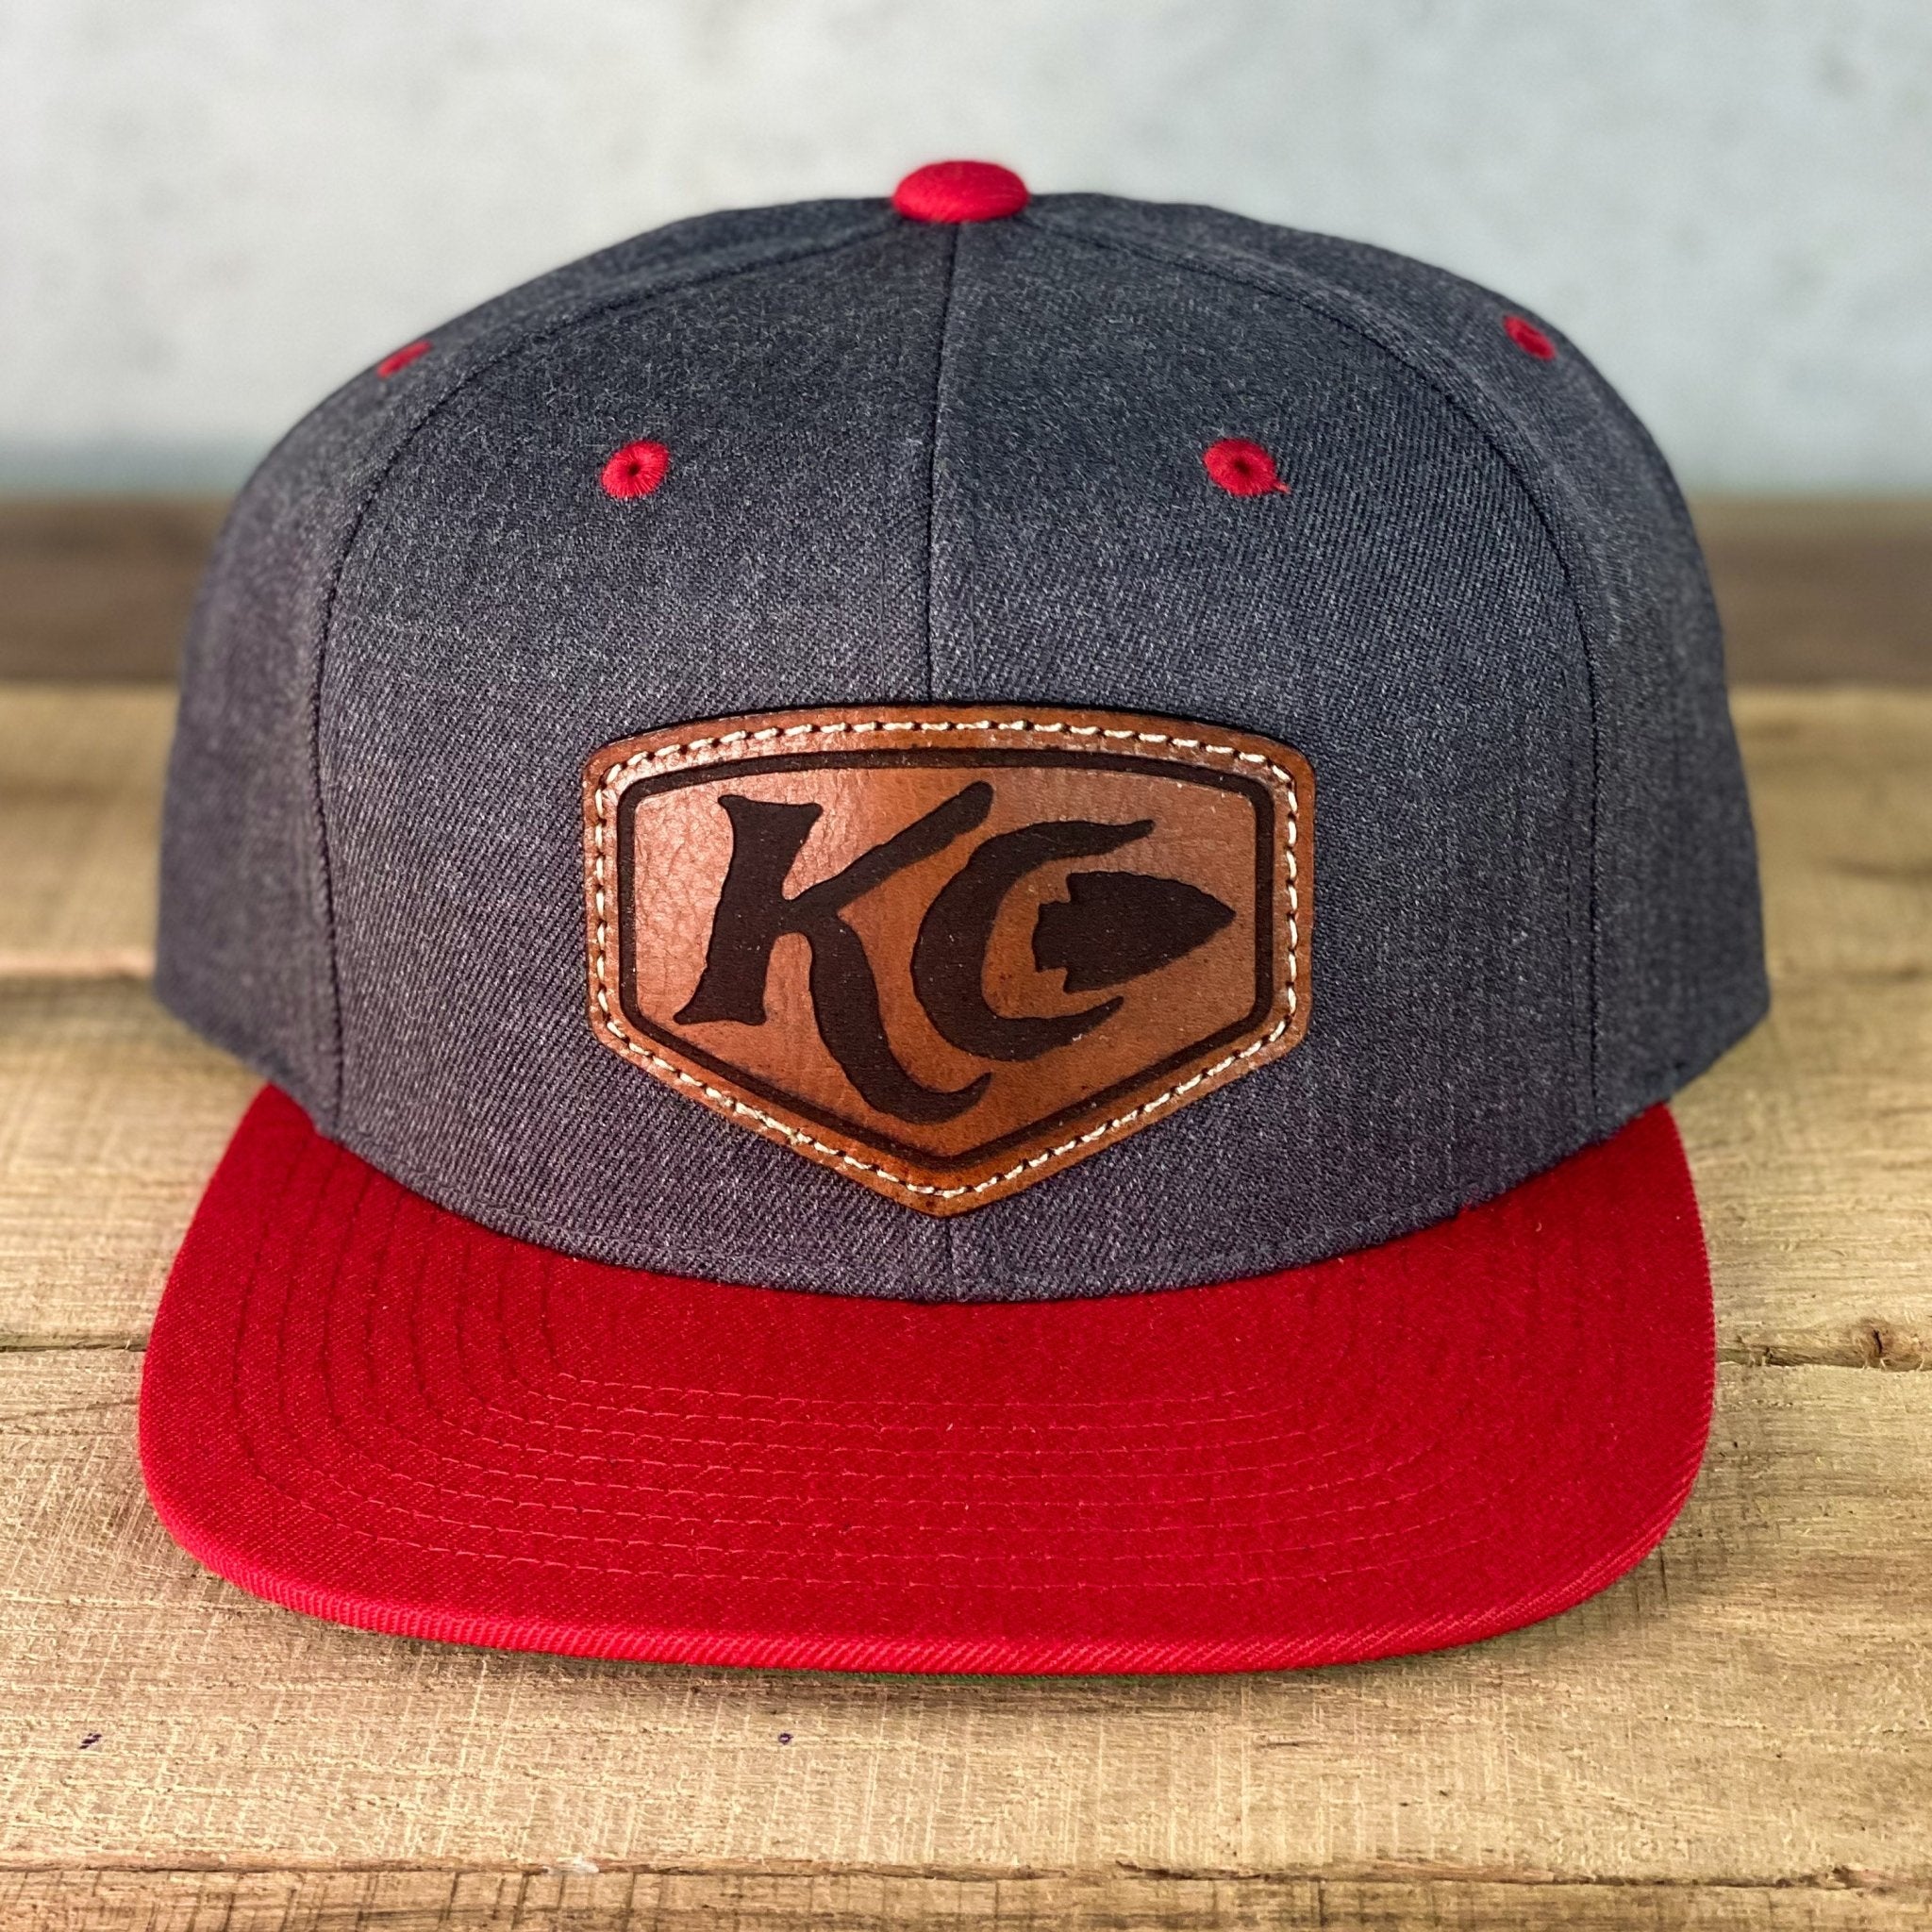 Arrowhead Inset - Red / Grey Yupoong Flatbill Leather Patch Hat